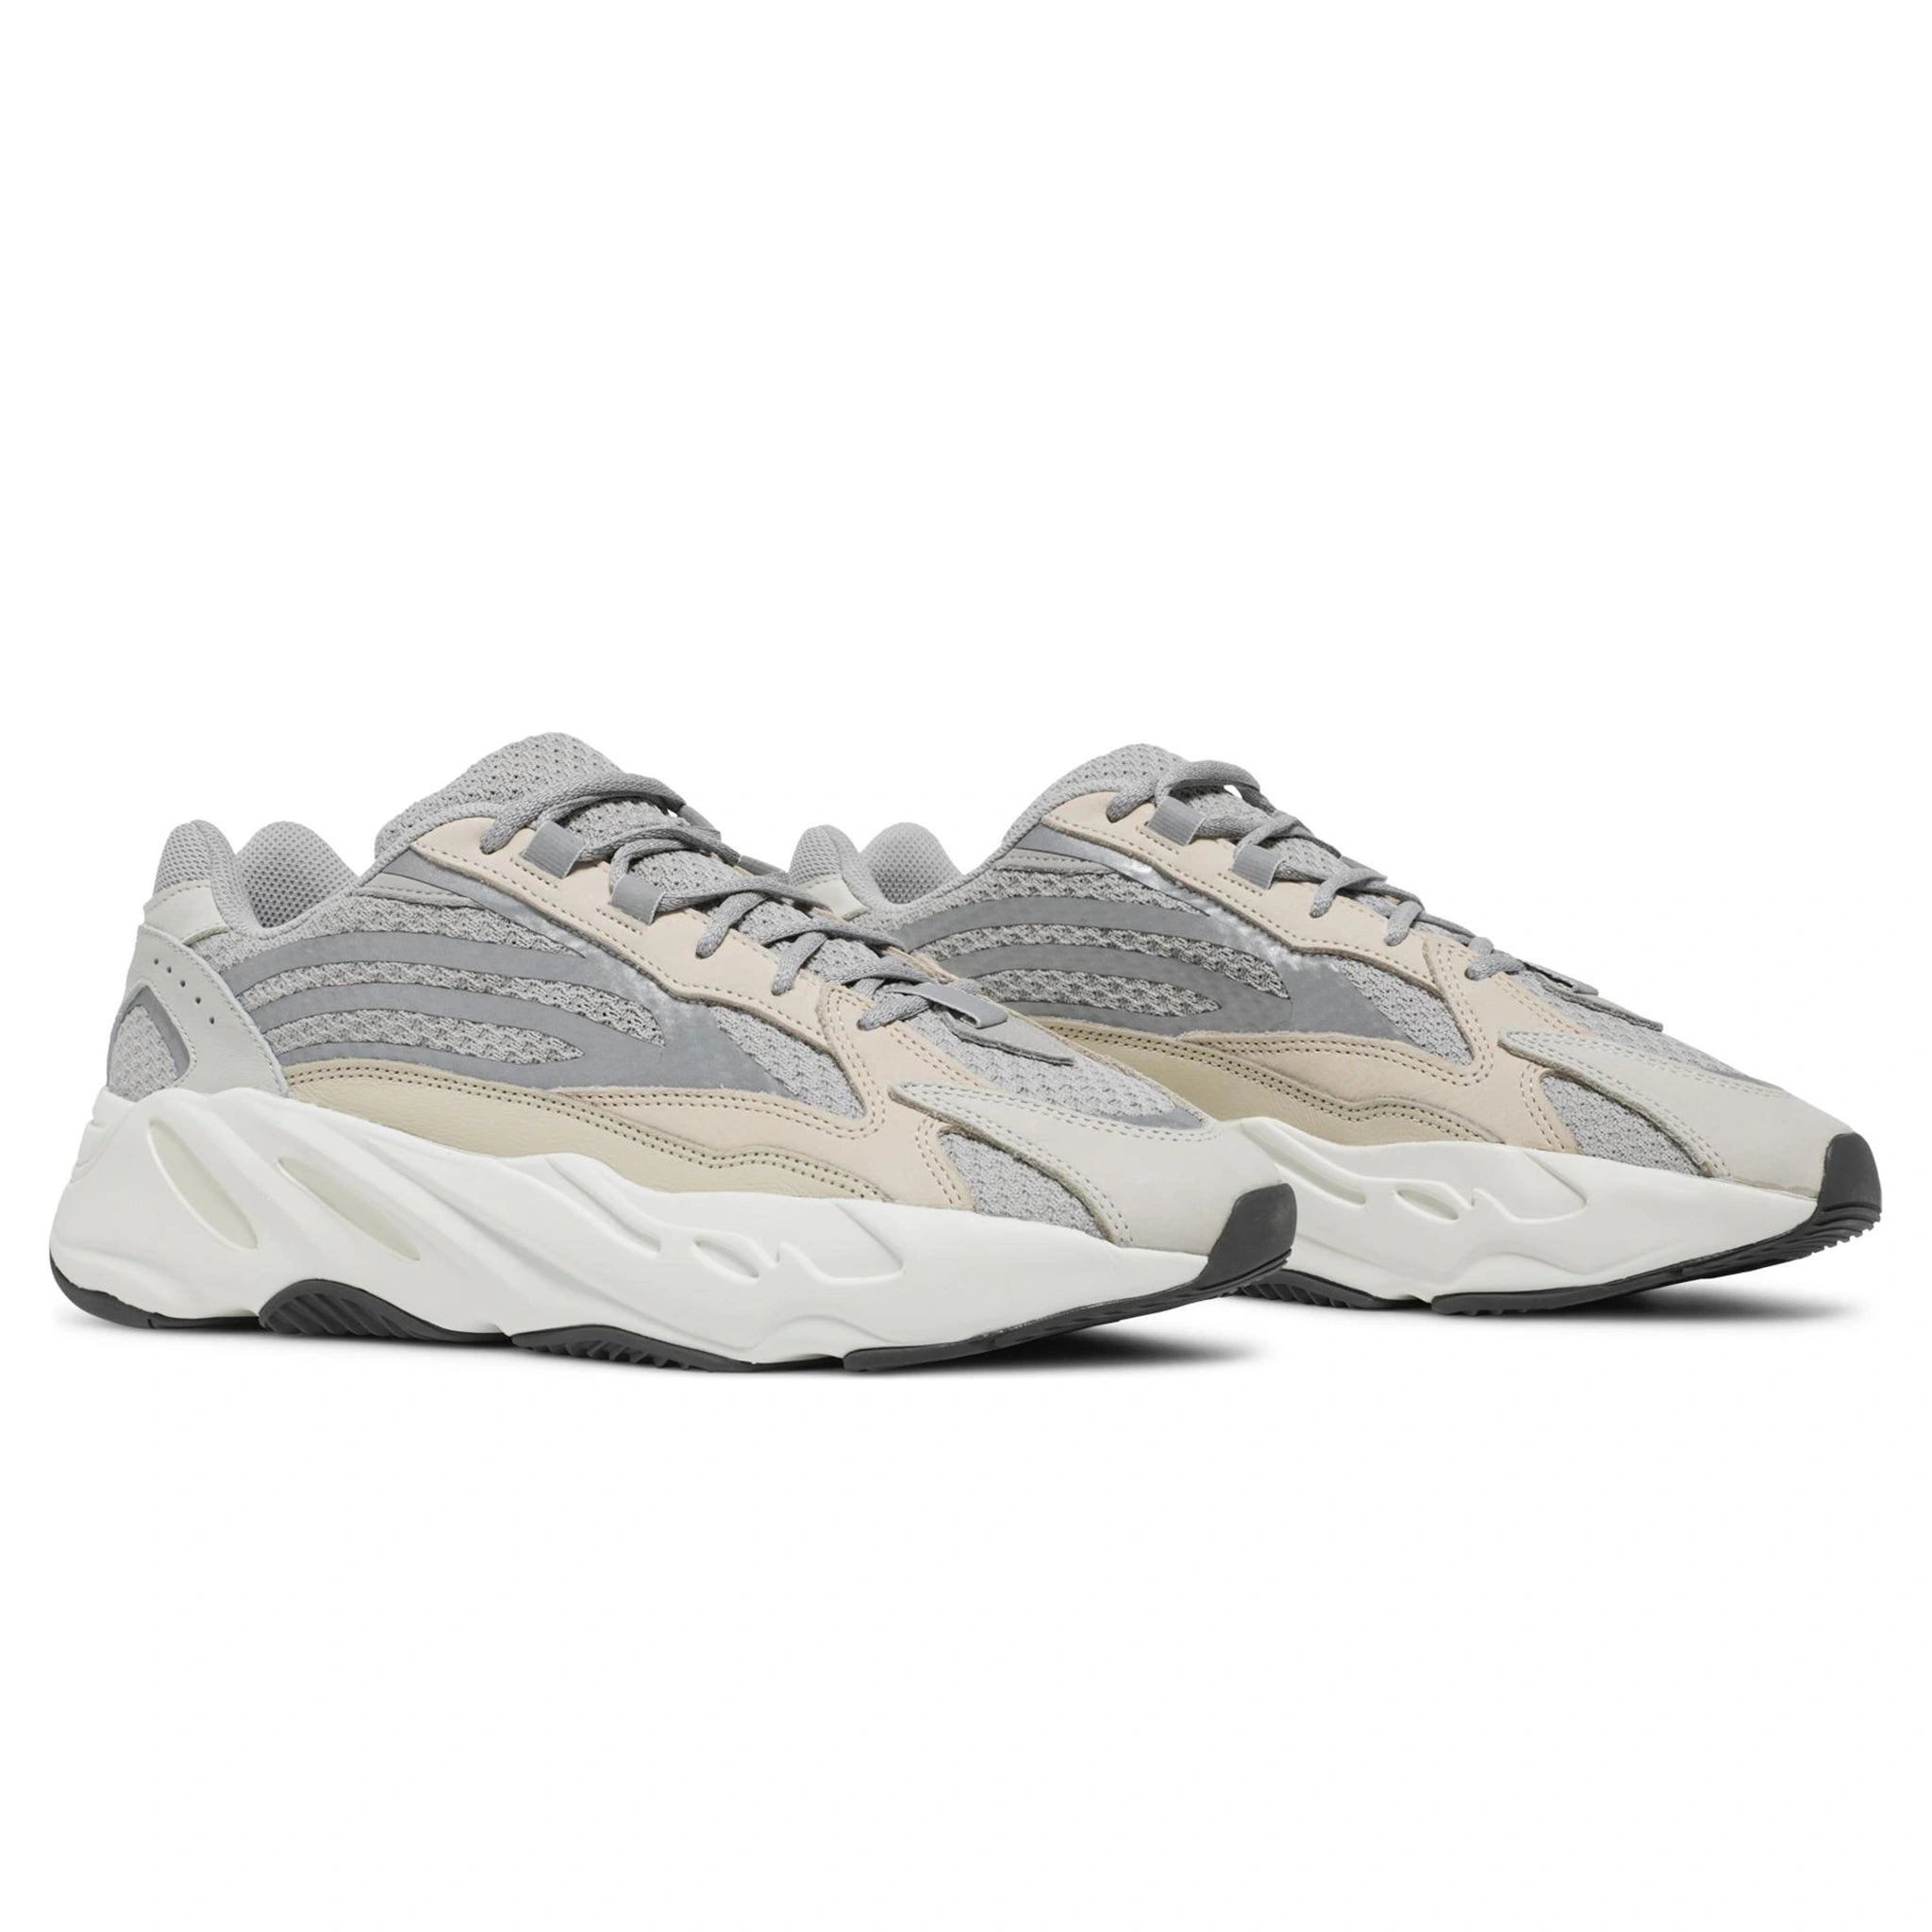 Front side view of Adidas Yeezy 700 Boost V2 Cream GY7924